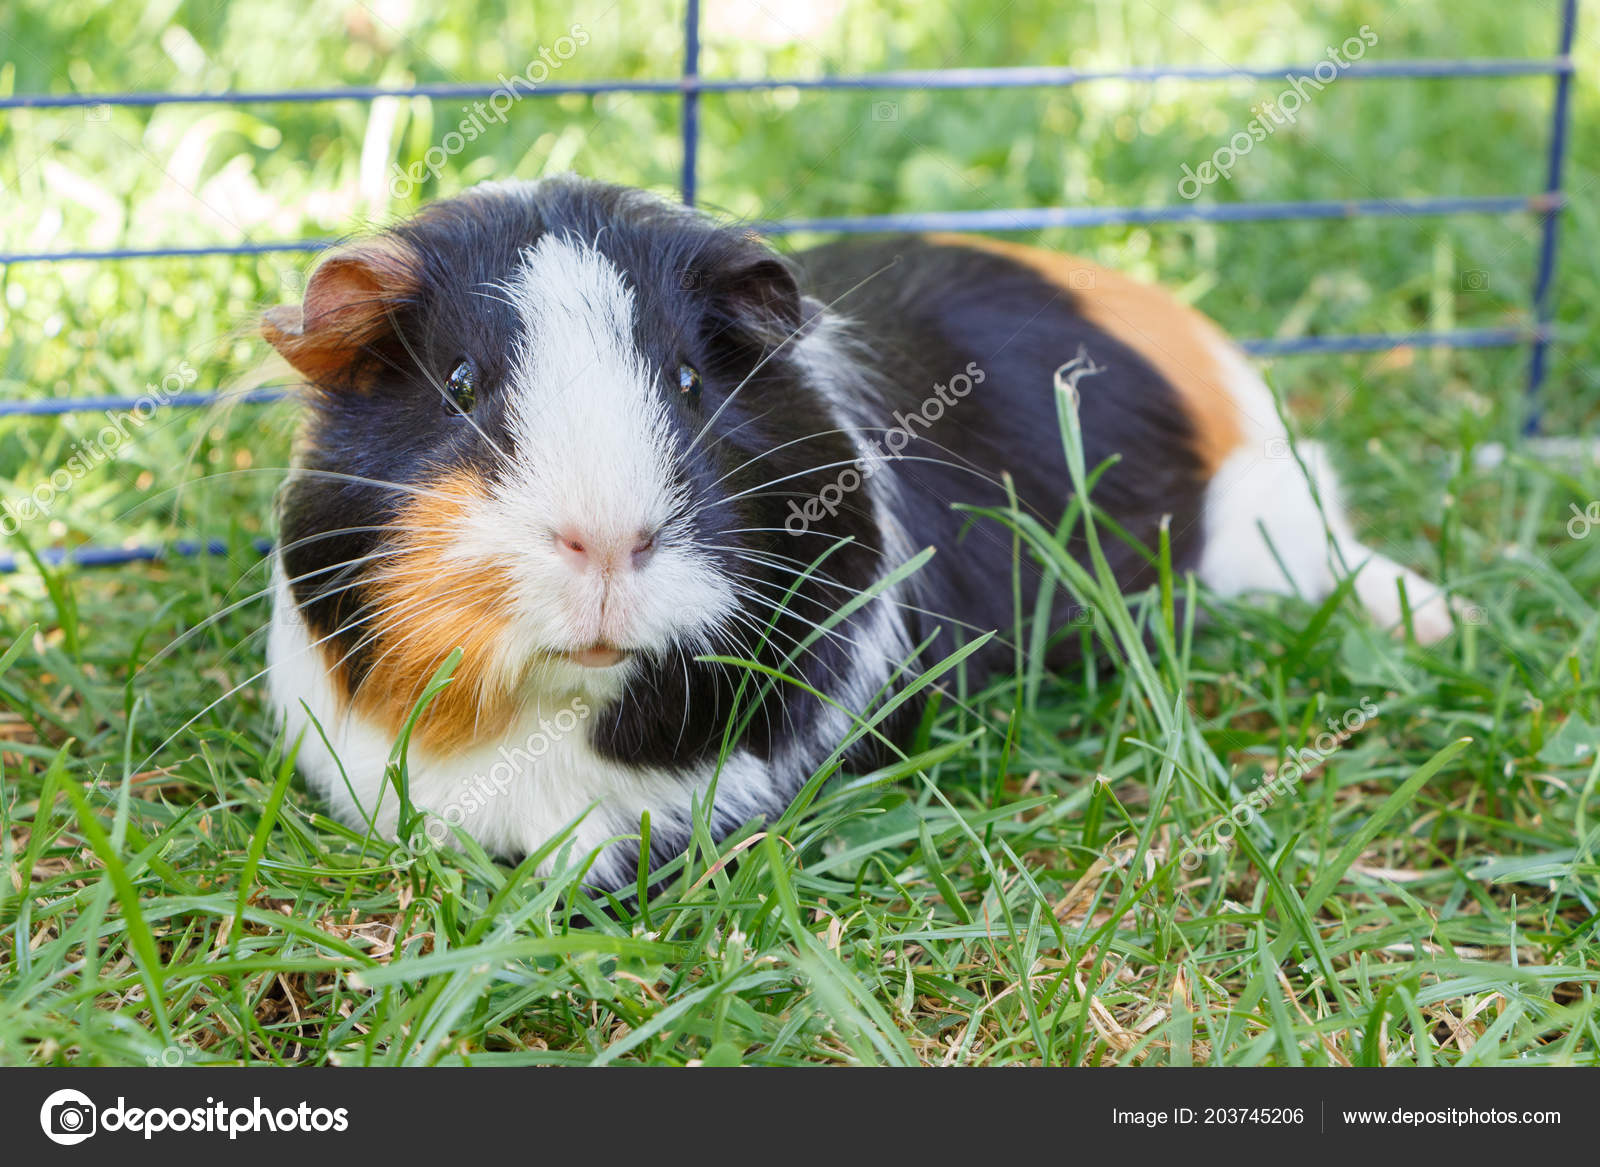 Guinea Pig Lying Grass Wire Fencing Stock Photo C Oceane2508